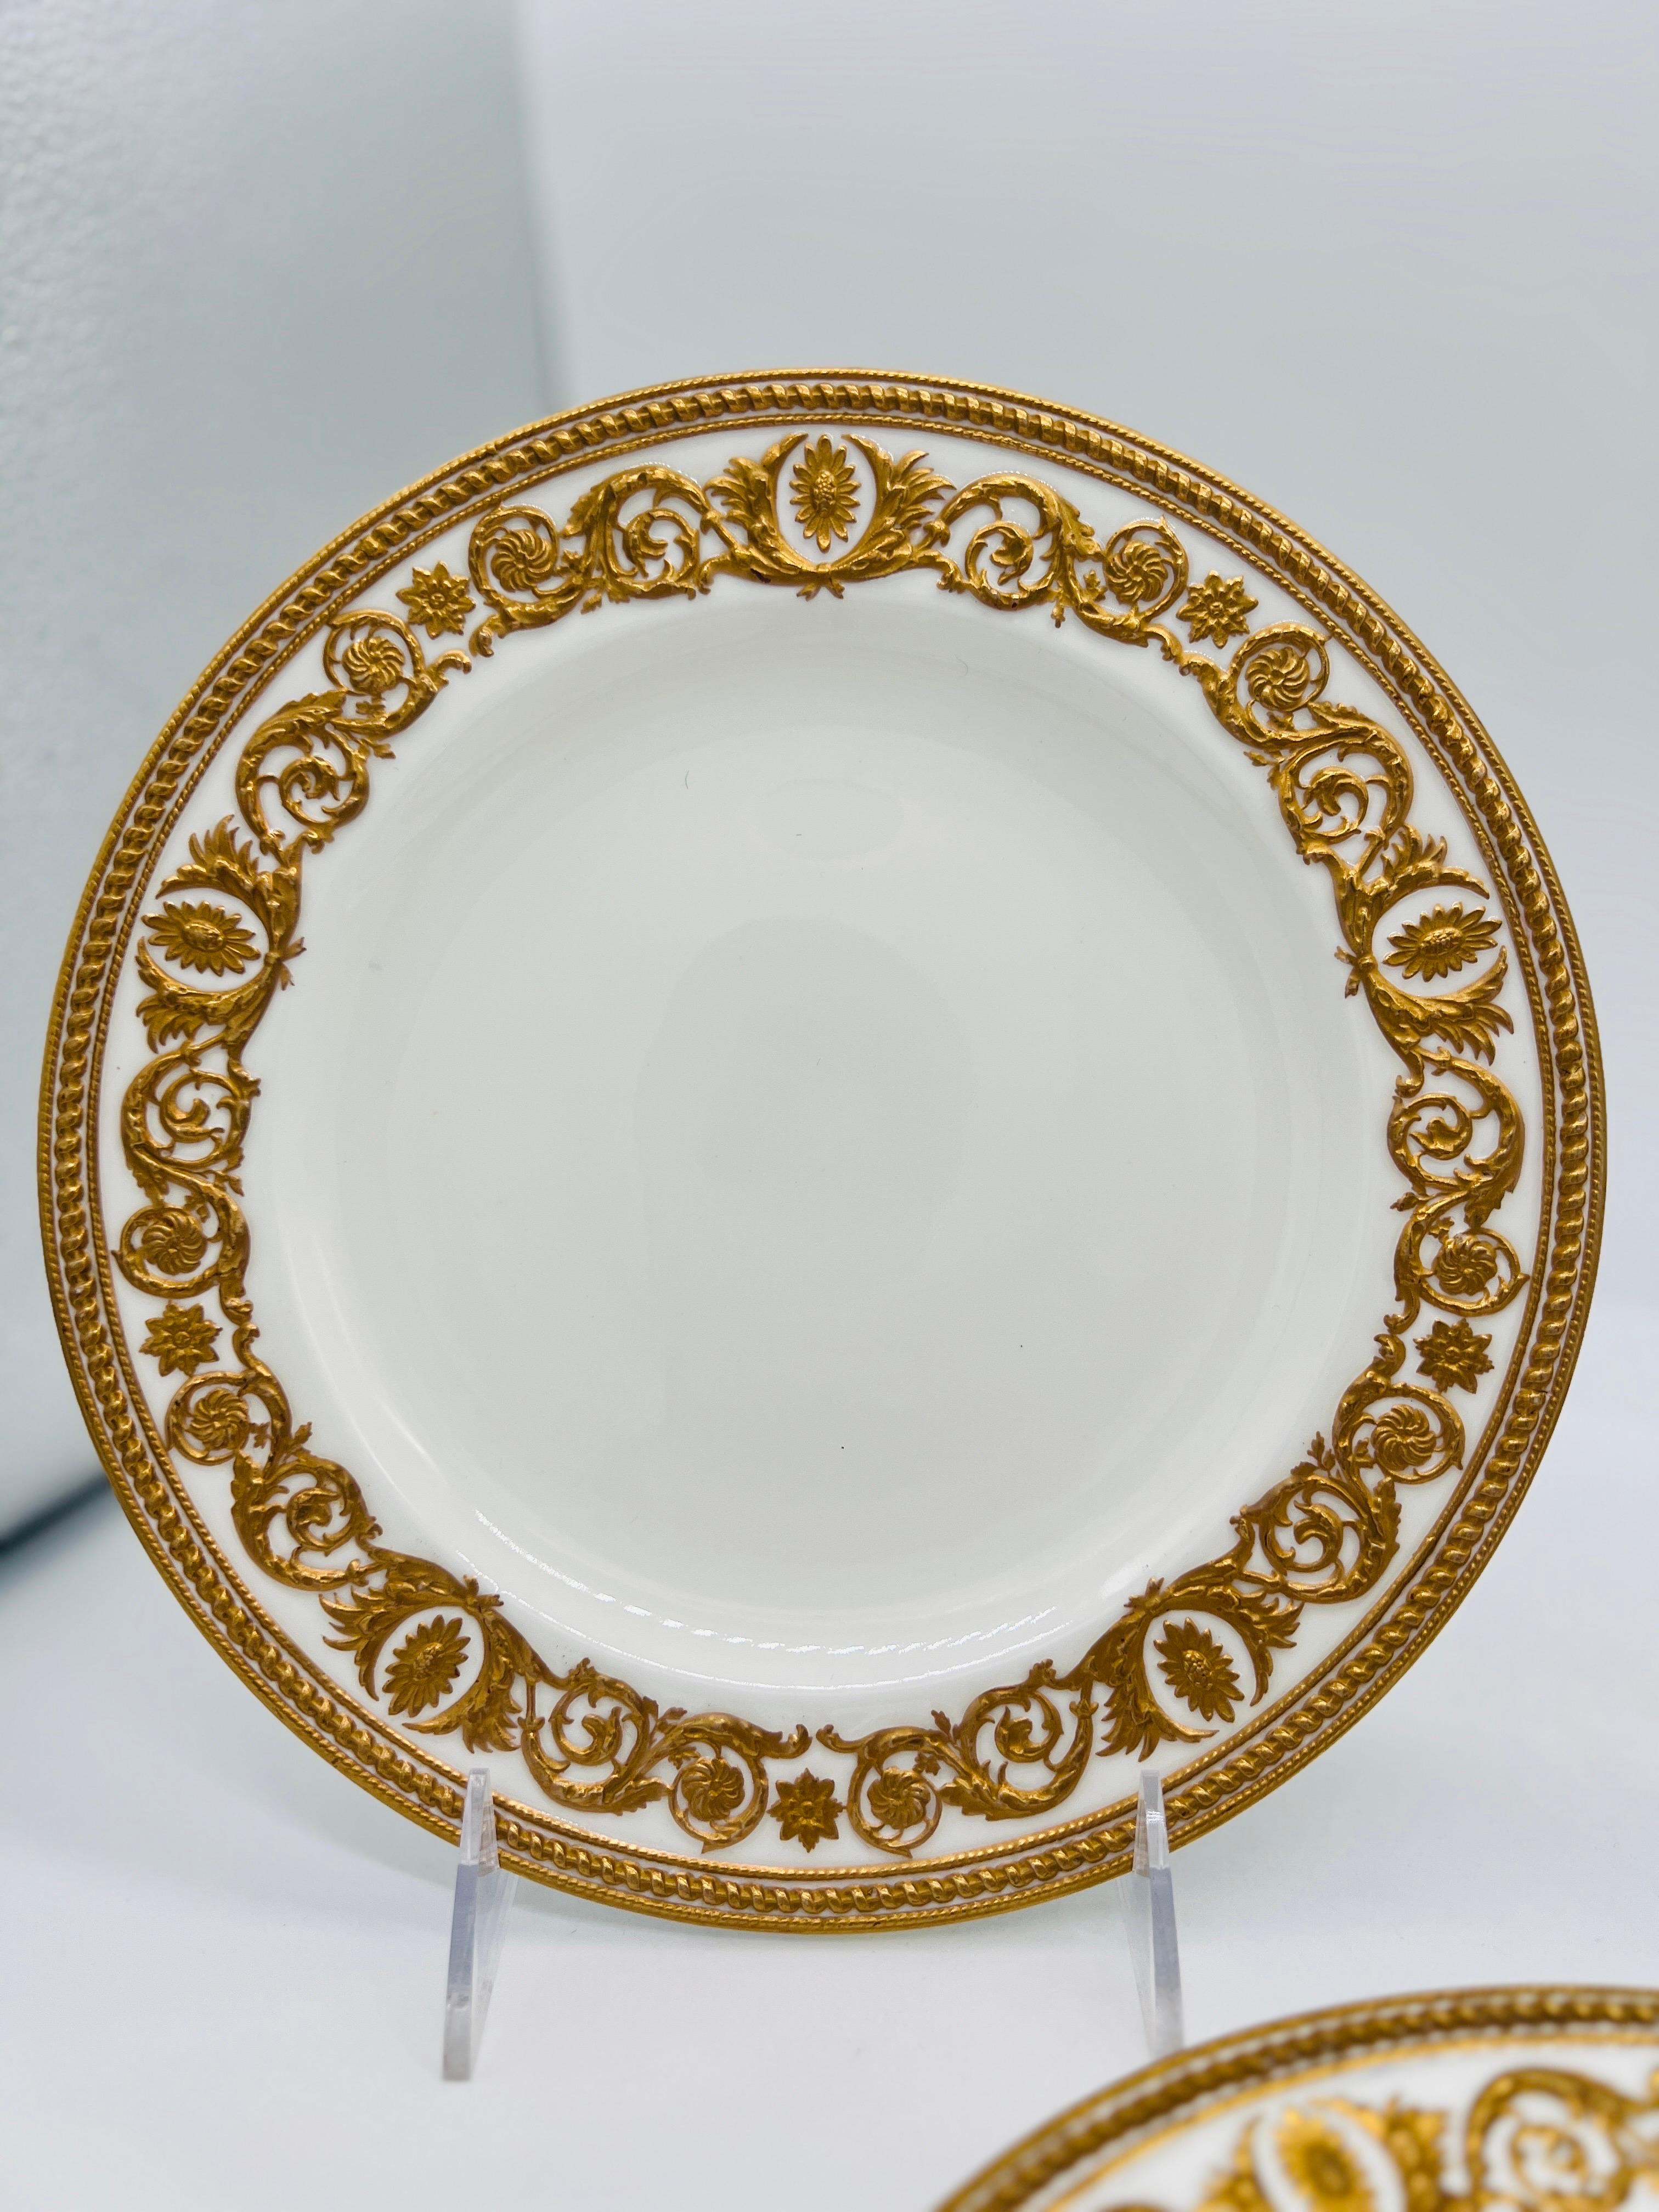 Wedgwood (English, founded 1759) for Richard Briggs Company (American, originally founded 1798-1946).

A grouping of 3 Wedgwood for Richard Briggs & Company porcelain plates measuring 9